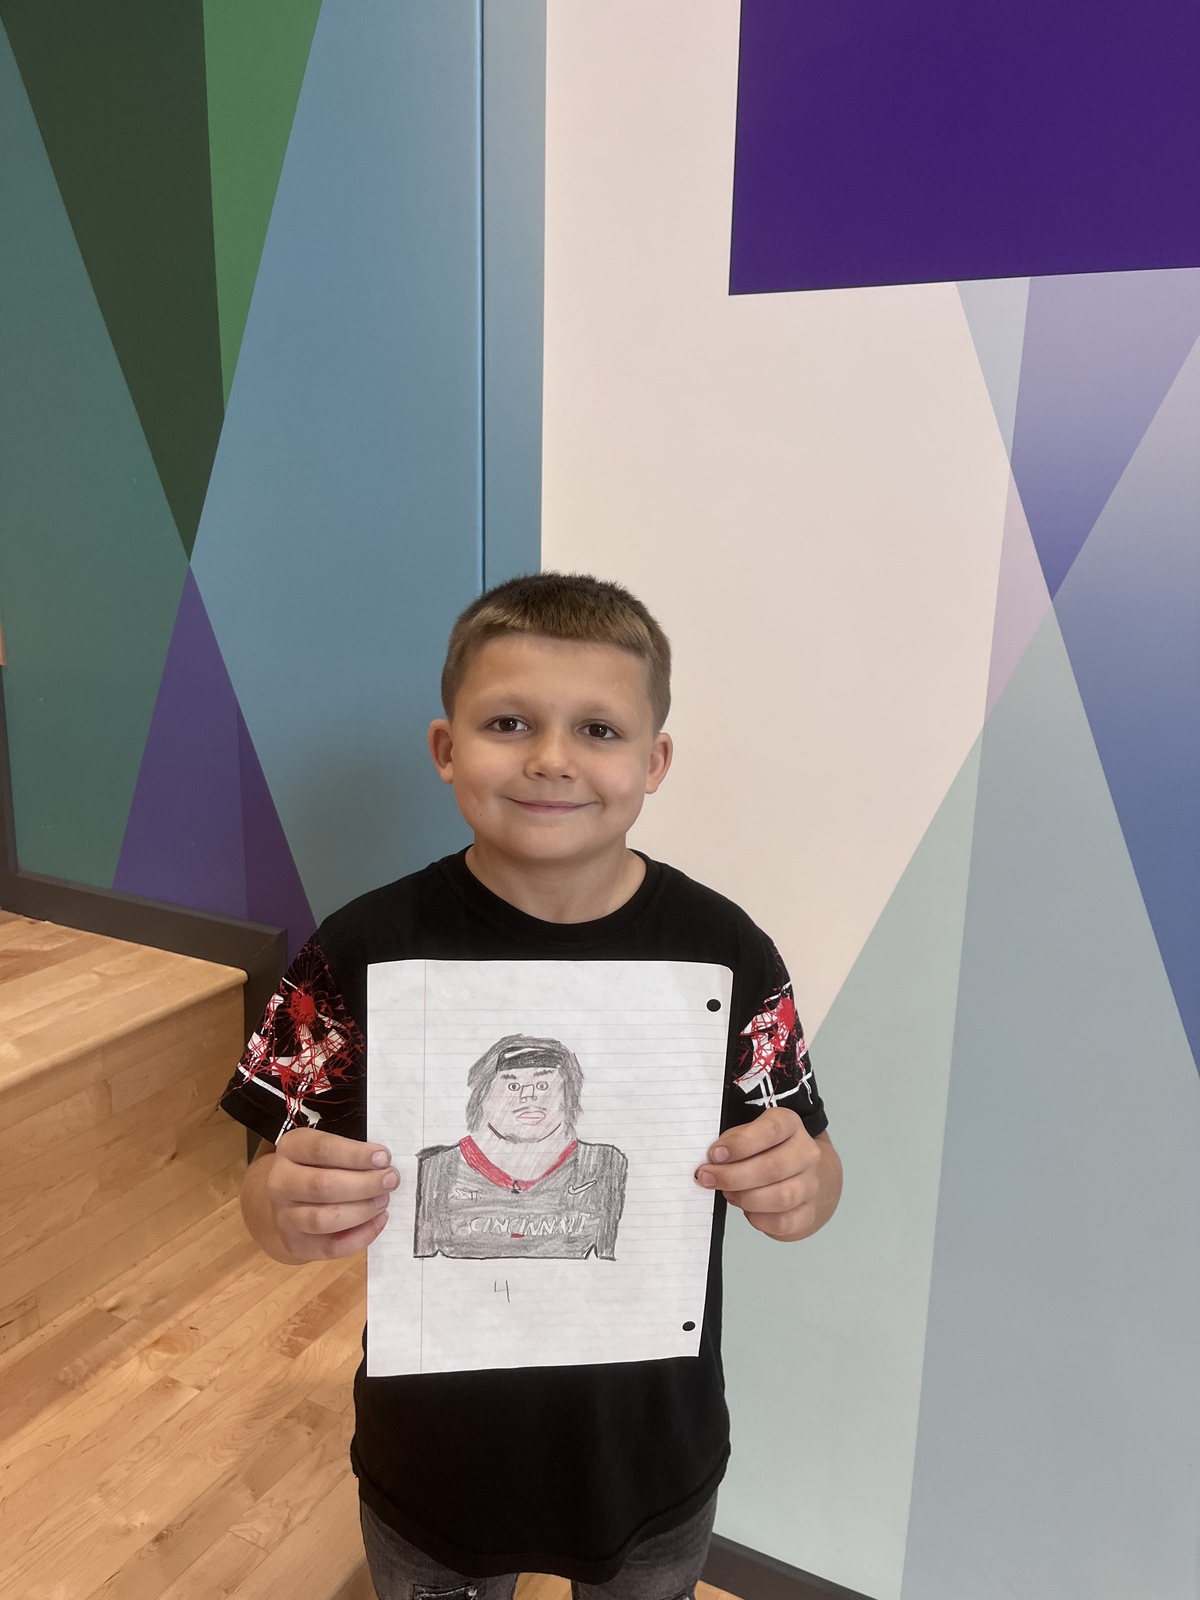 Student holds artwork he drew of UC Football player.